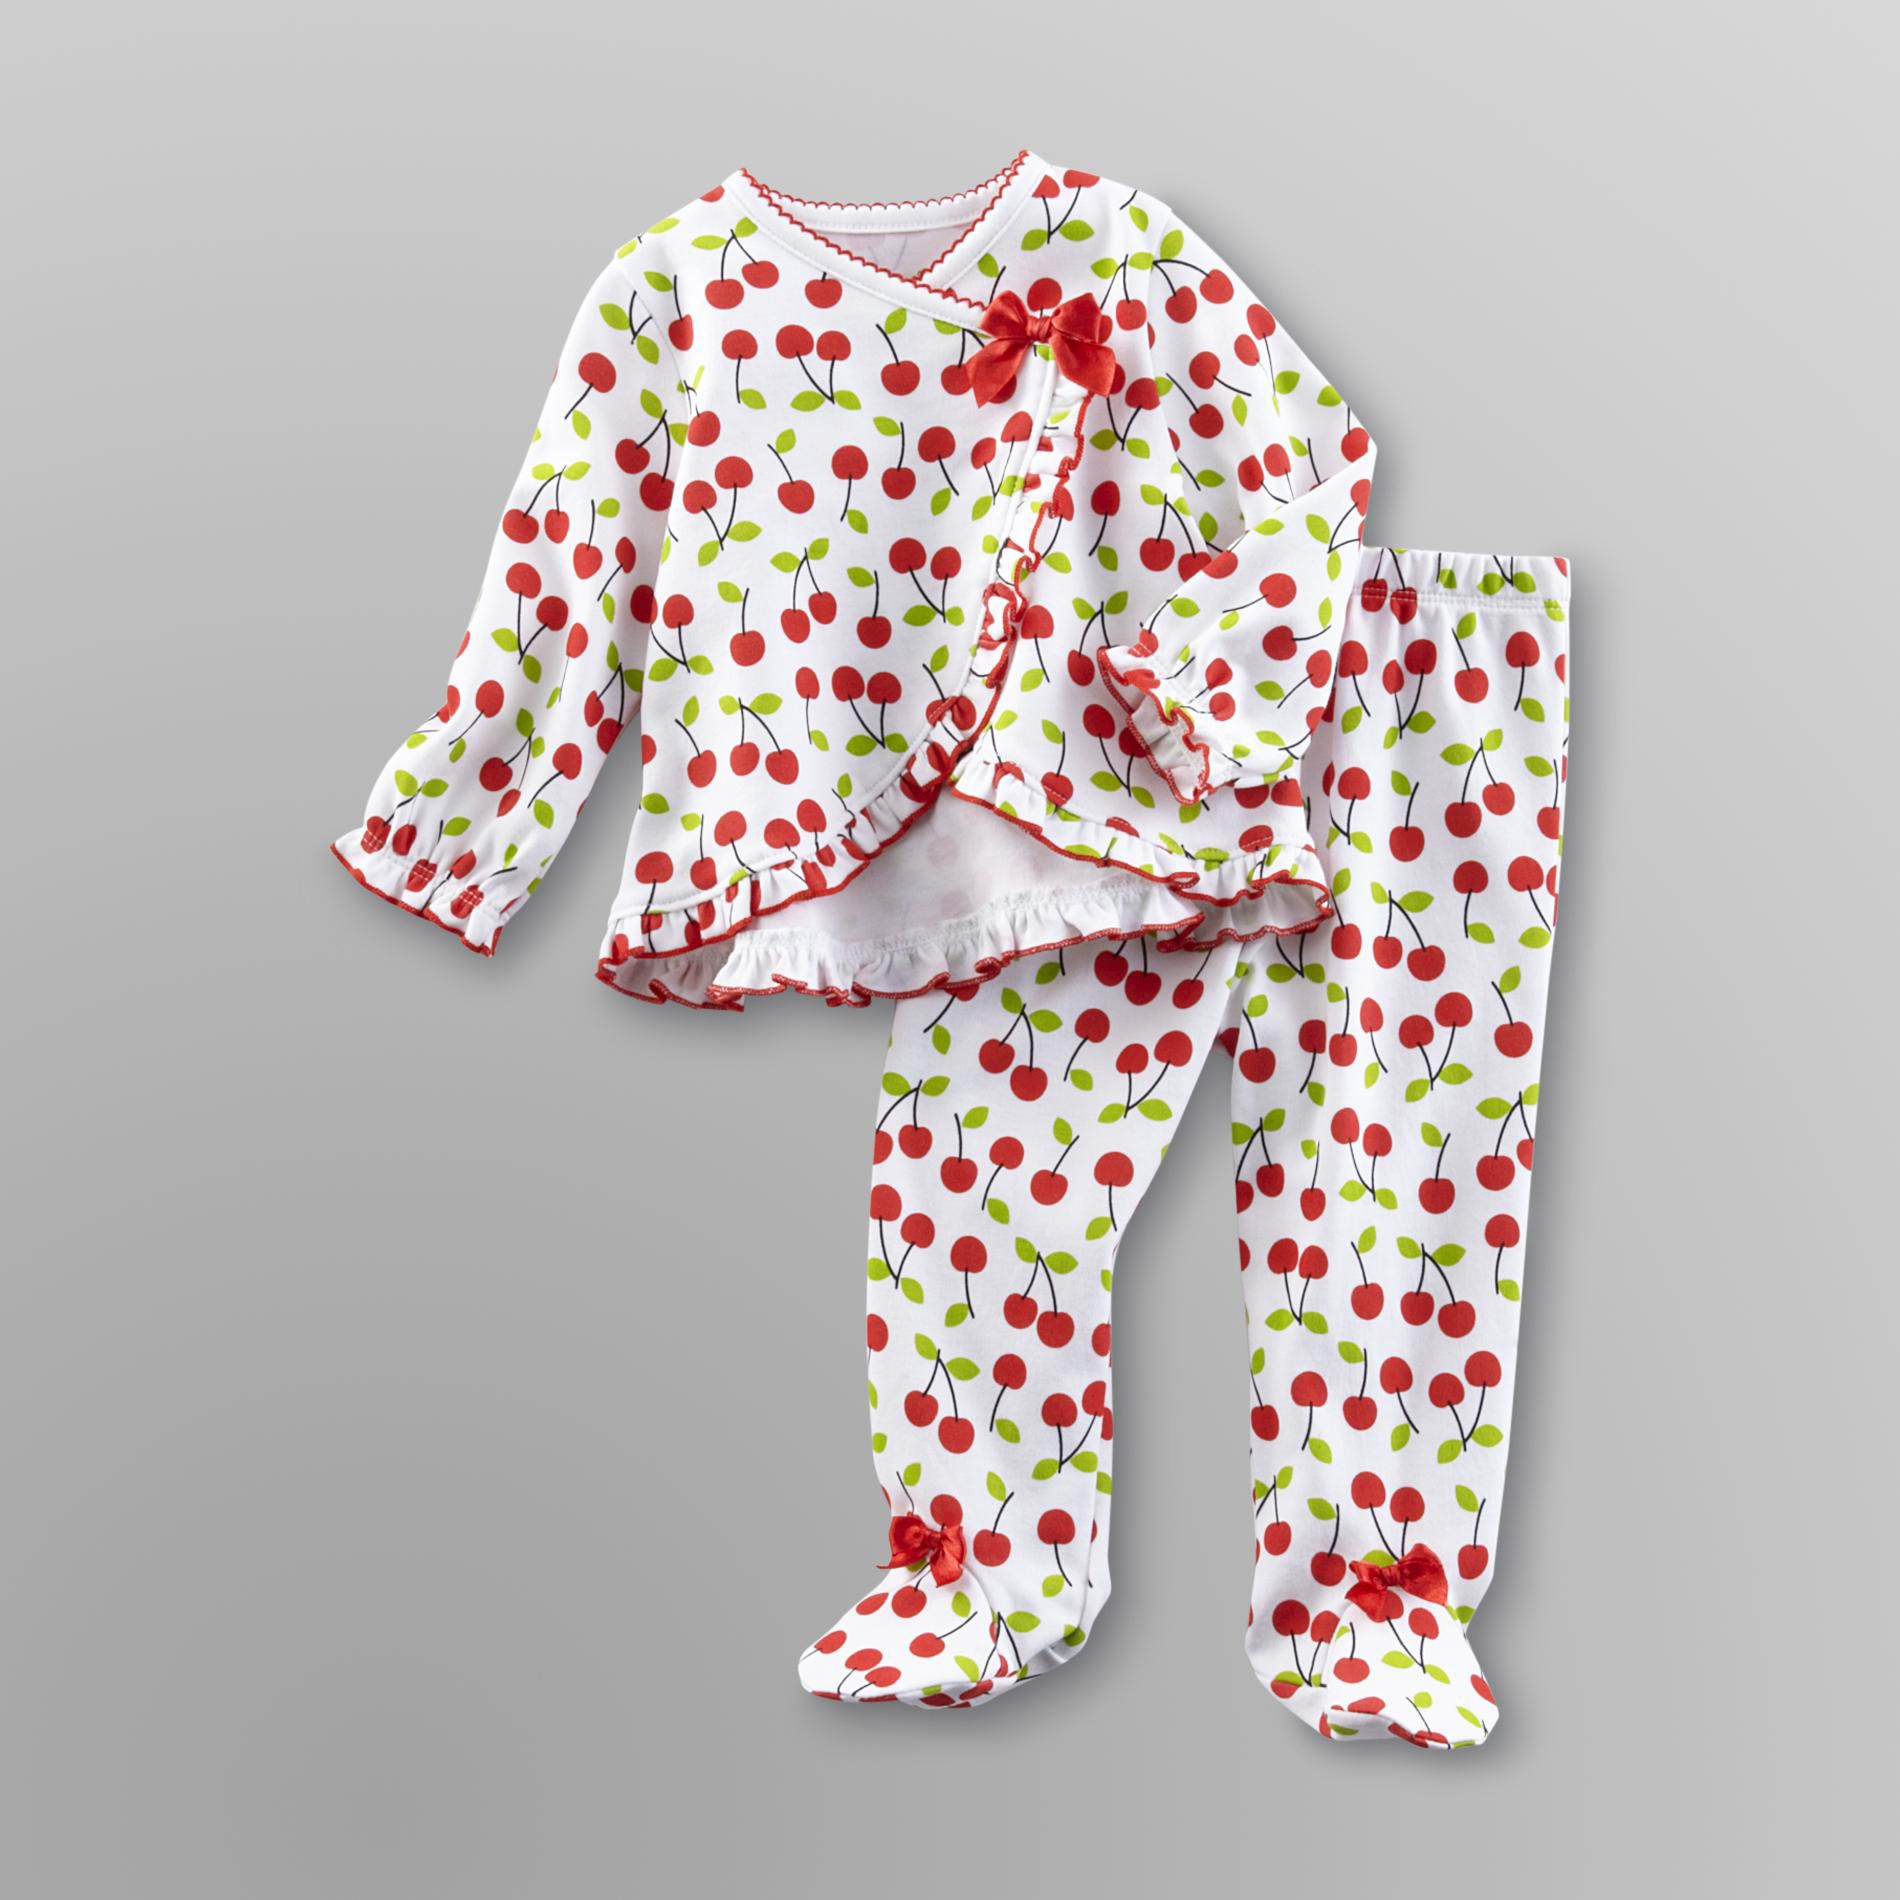 Welcome to the World Infant Girl's Wrap Pajamas - Cherries